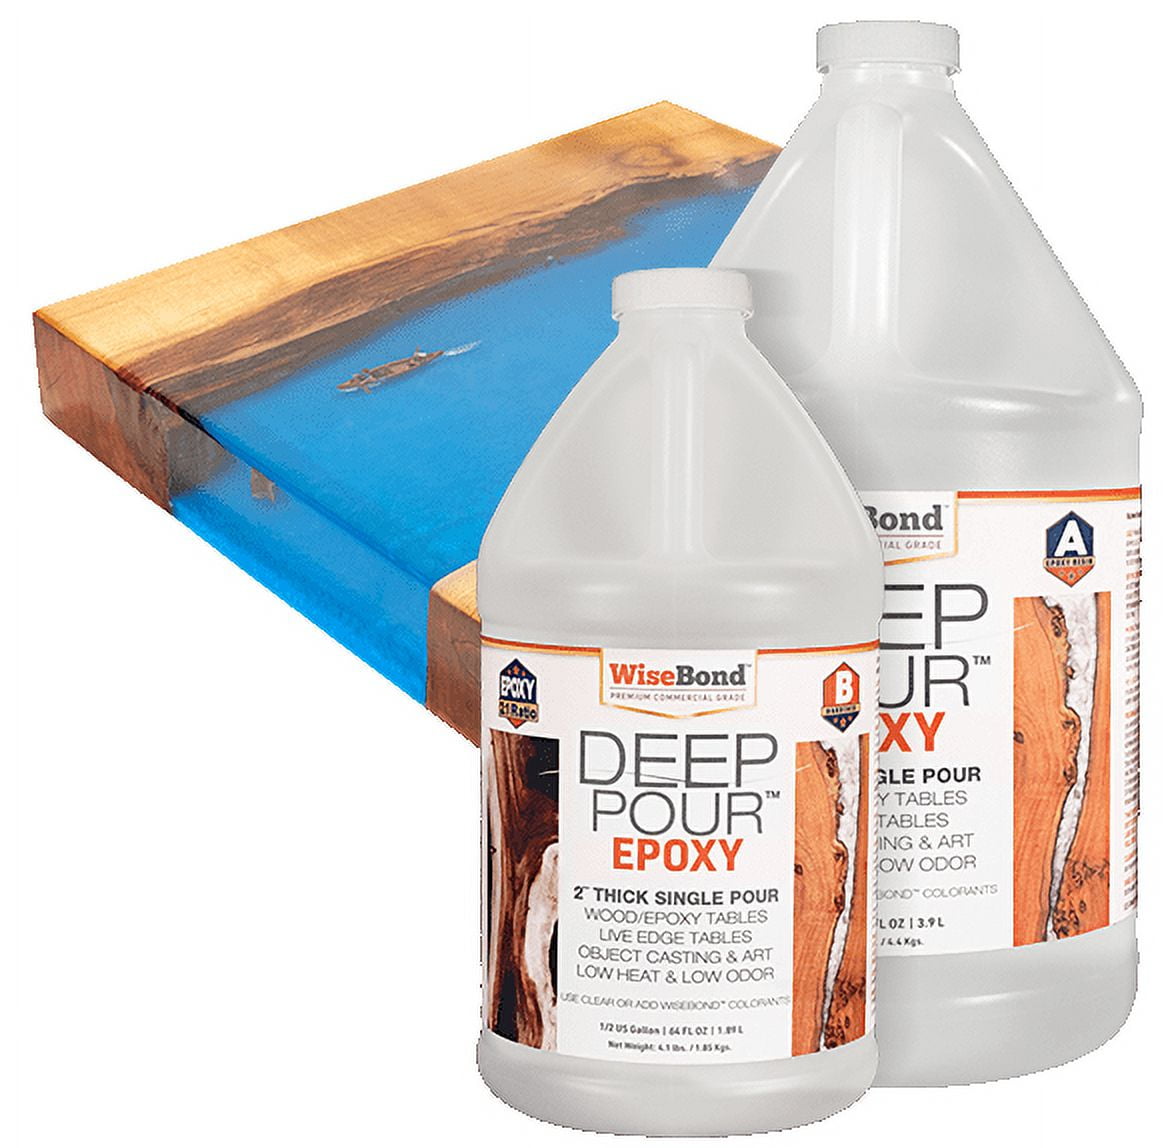 WiseBond 3-Gallon Deep Pour Epoxy Resin Kit Is Super Clear Epoxy for River Tables & Casting. High UV Resistance and Looks Like Smooth Liquid Glass.